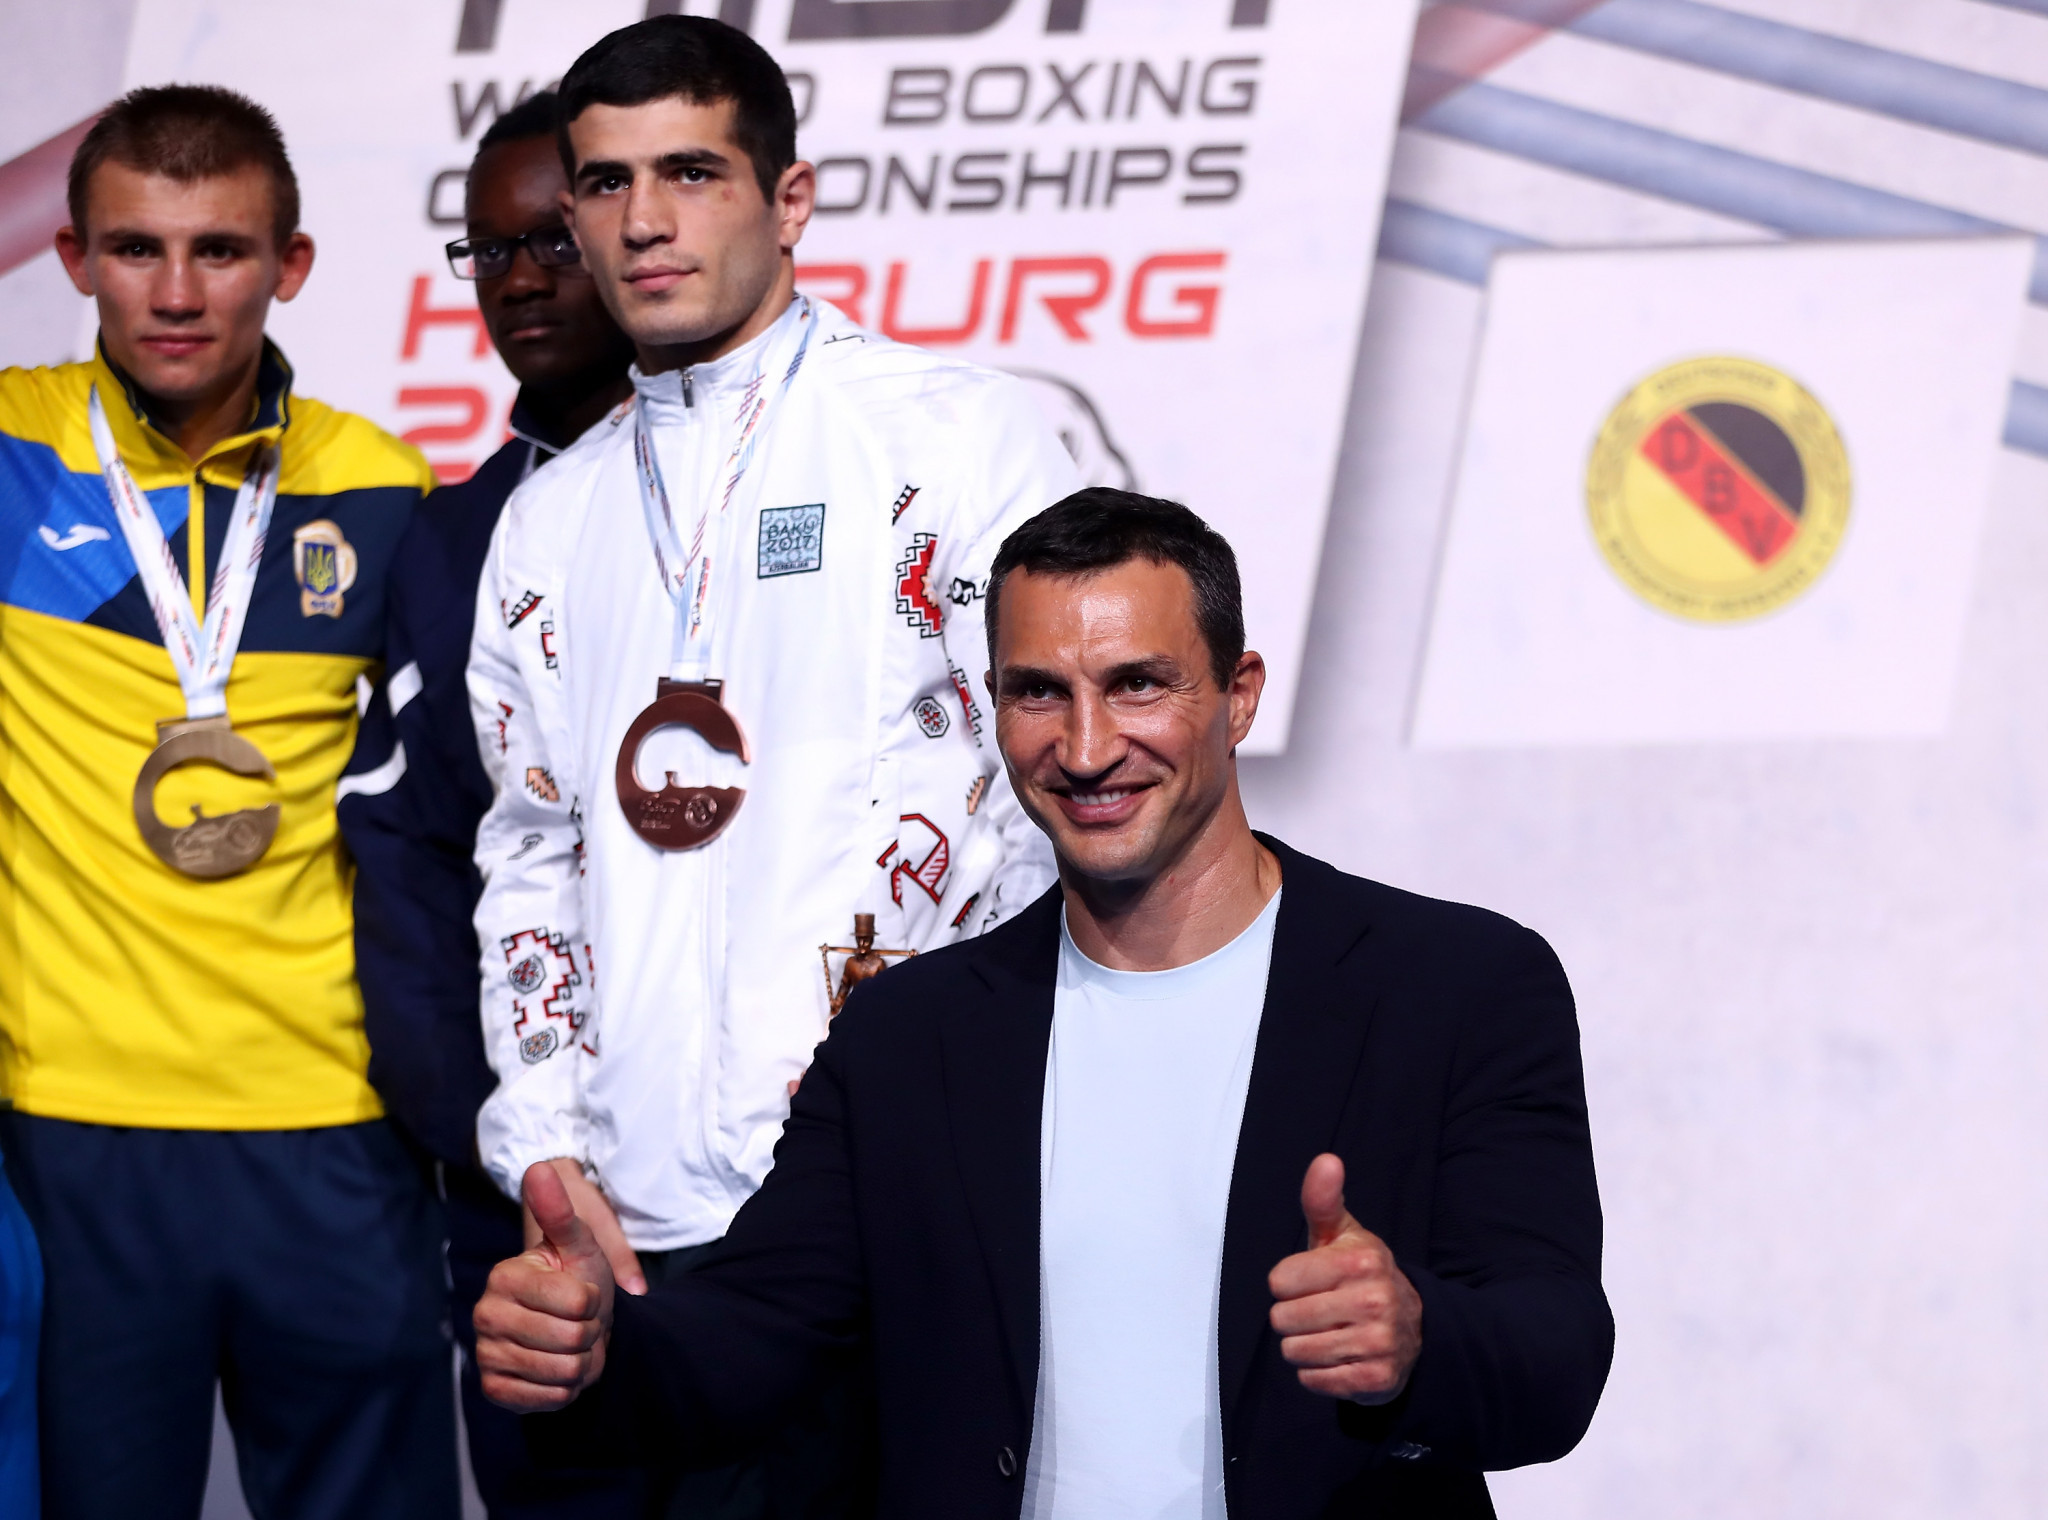 Wladimir Klitschko has warned that boxing's place on the Olympic programme is in danger and called for the World Boxing Association to be called in to manage the tournament at Tokyo 2020 ©Getty Images